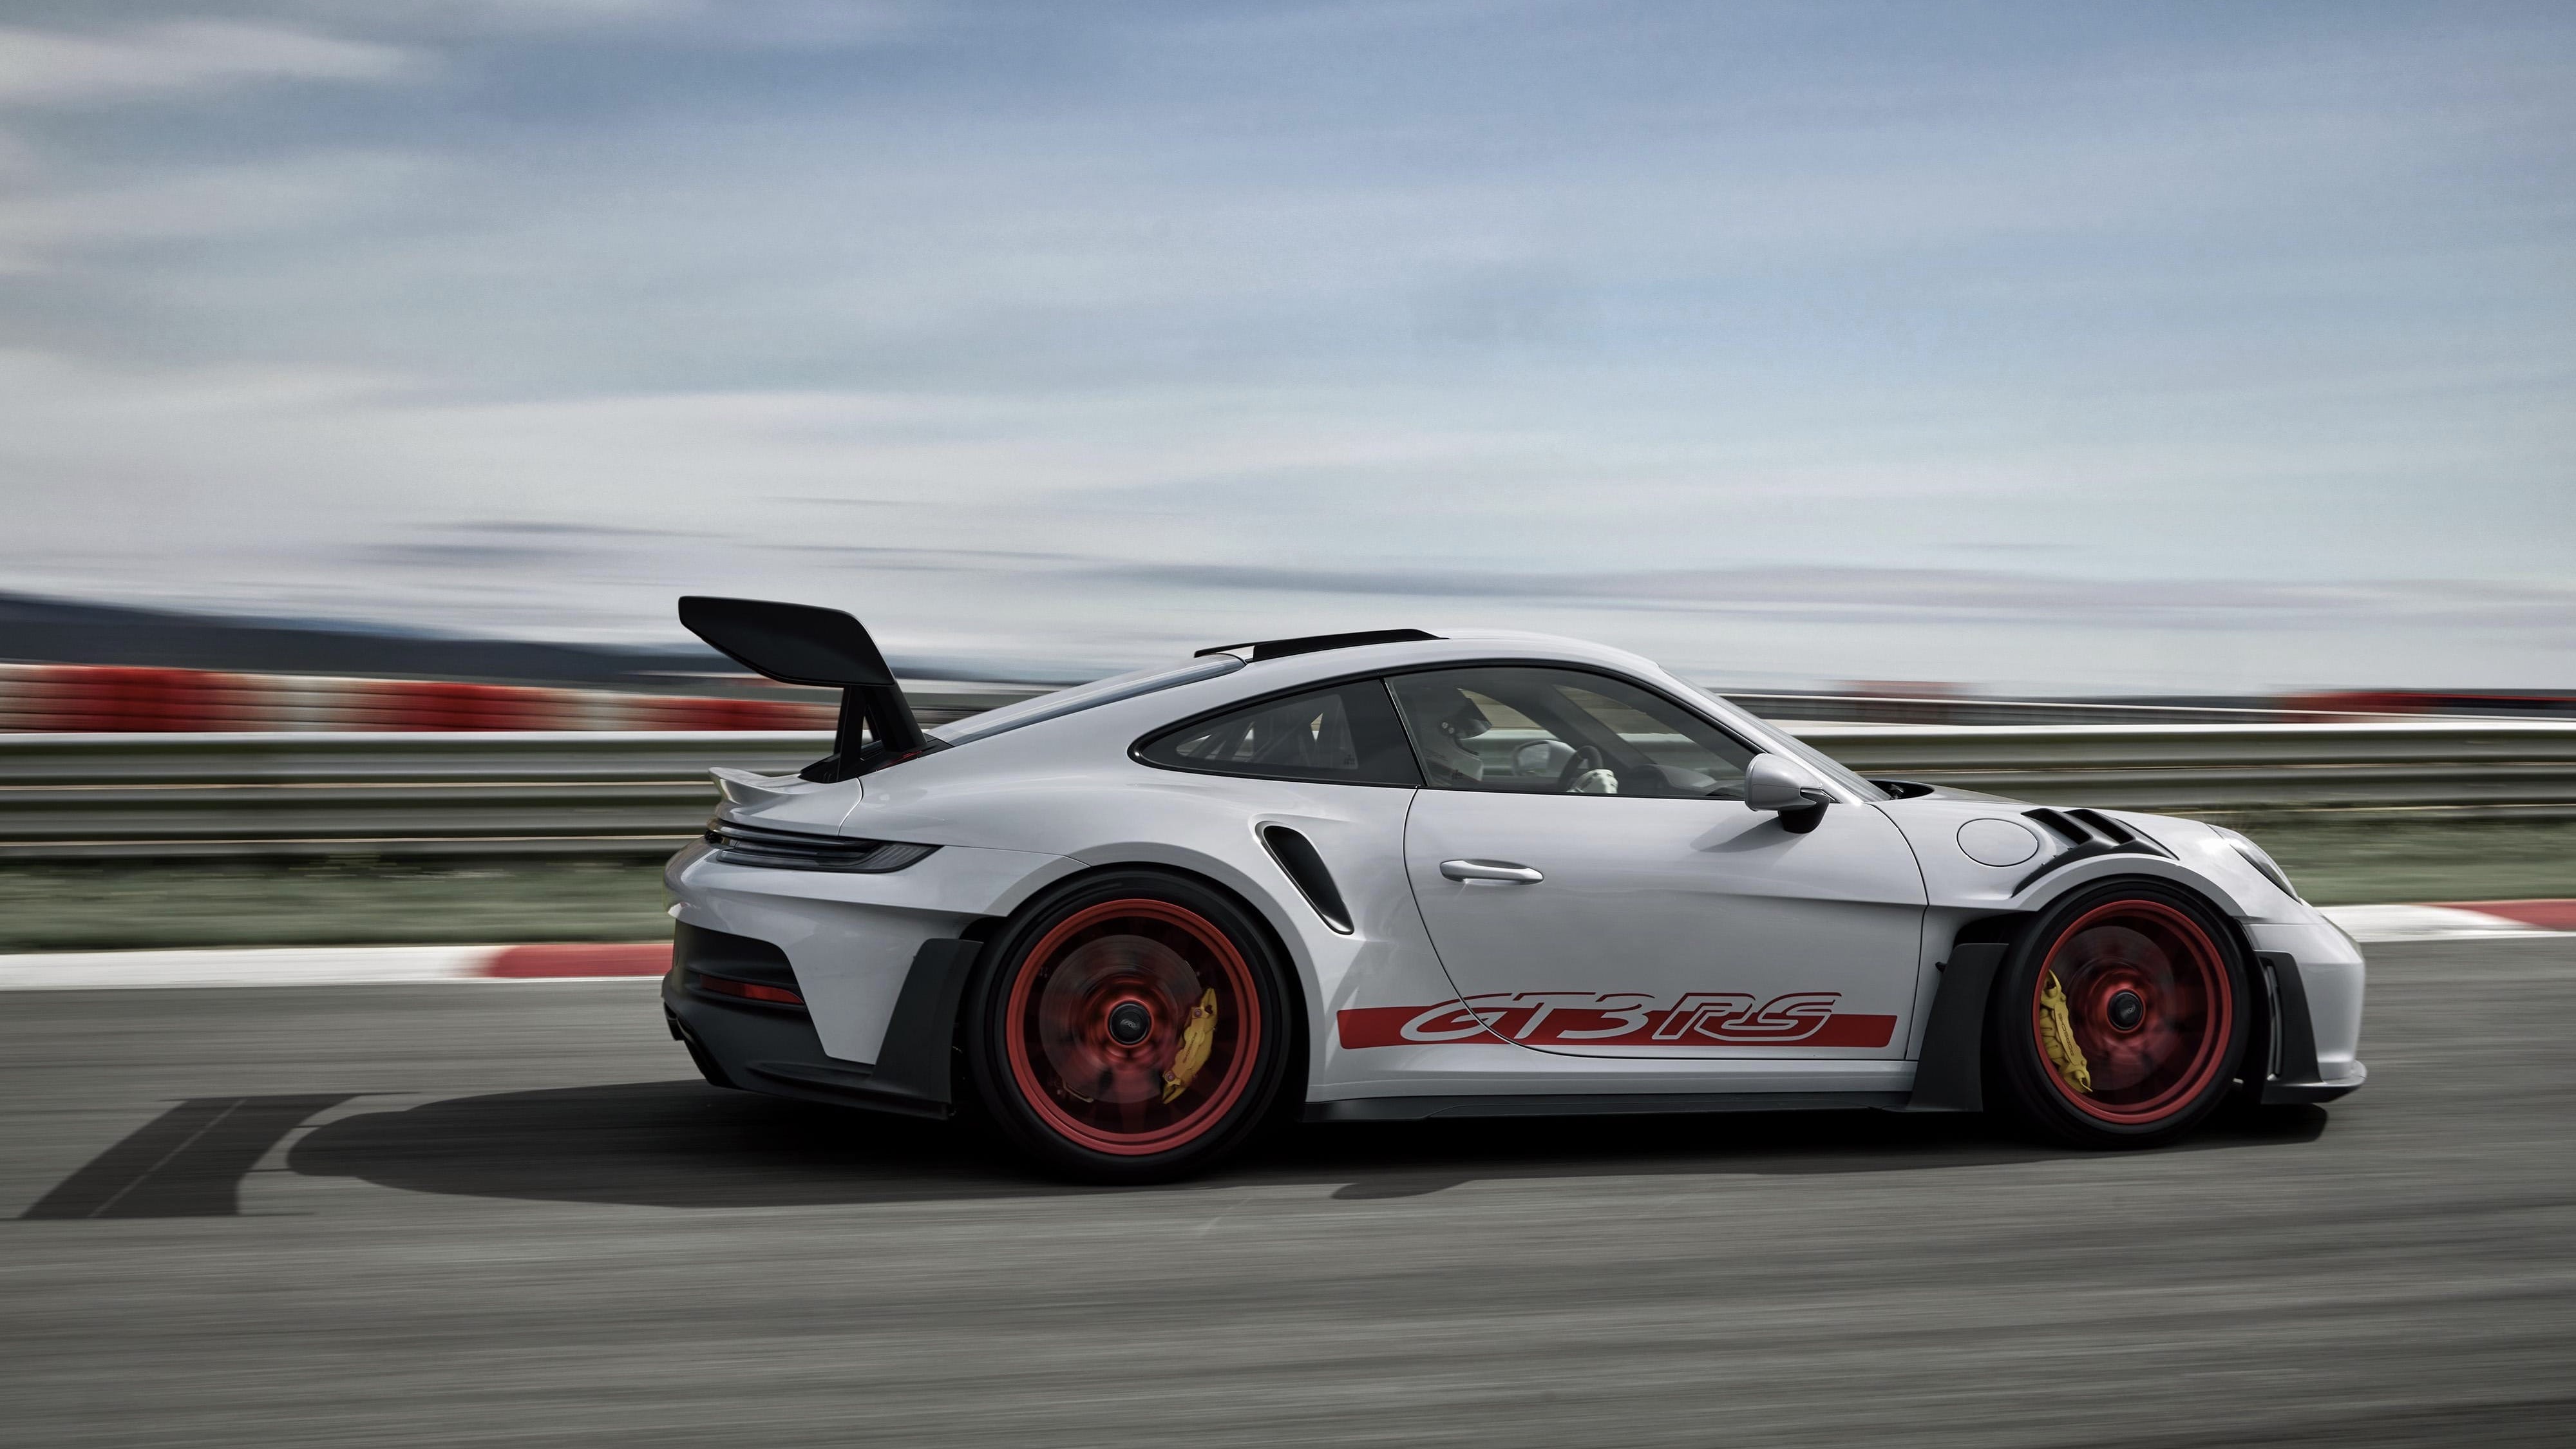 Porsche GT3 RS (992) - RSR Bookings - The Experience of a Lifetime